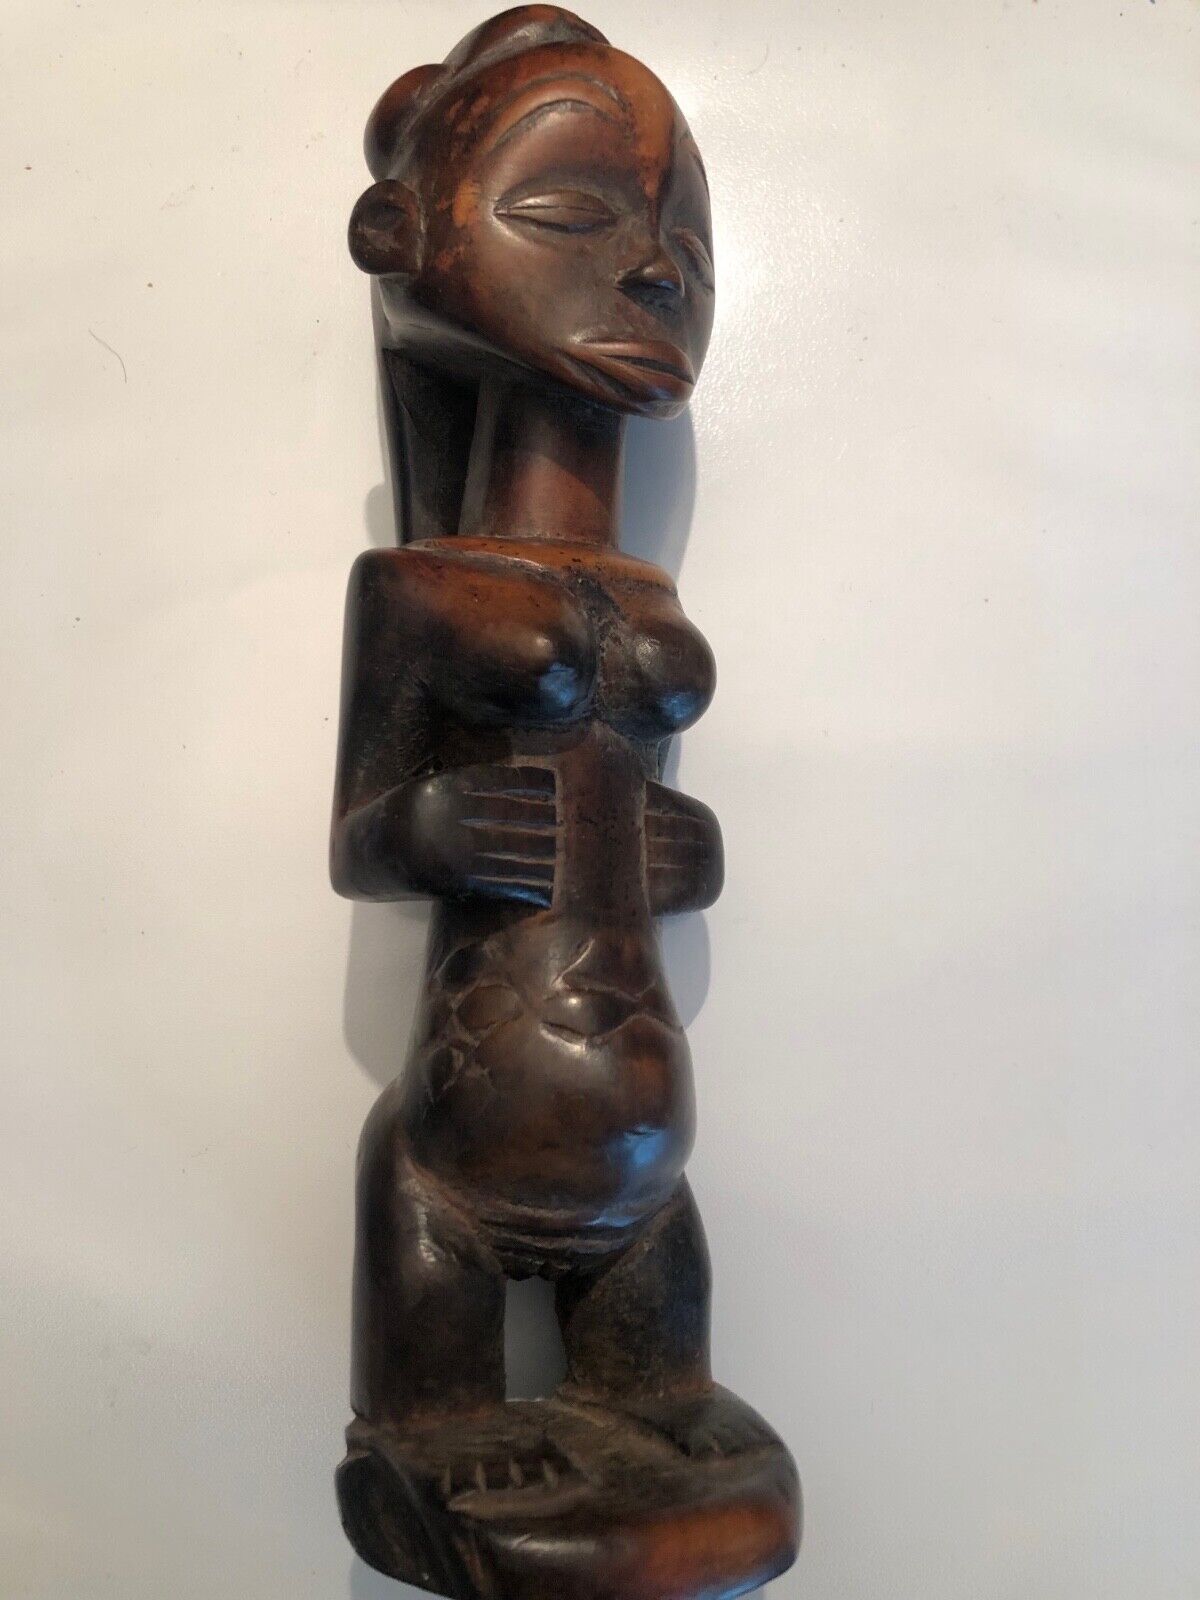 West African Female Figure. Likely Mali or Nigeria. 9\